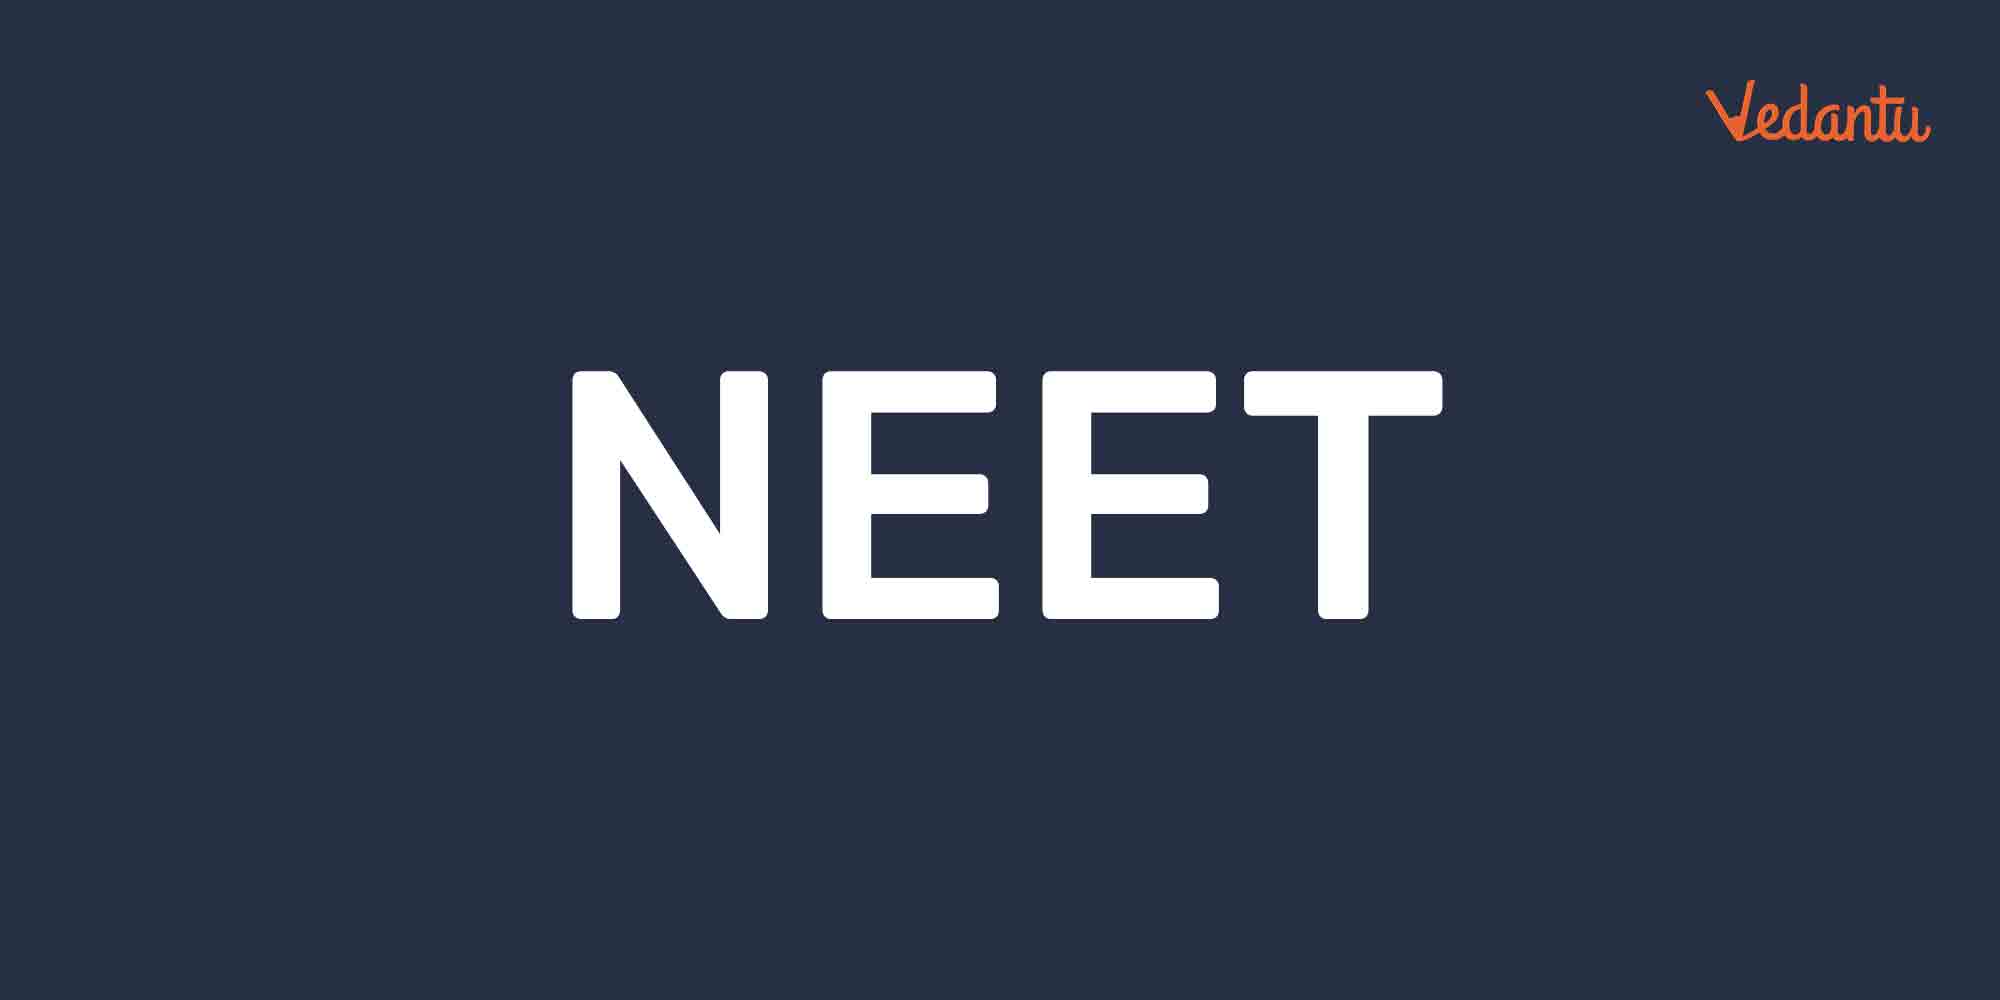 How to Prepare for NEET 2021 in 10 Days?